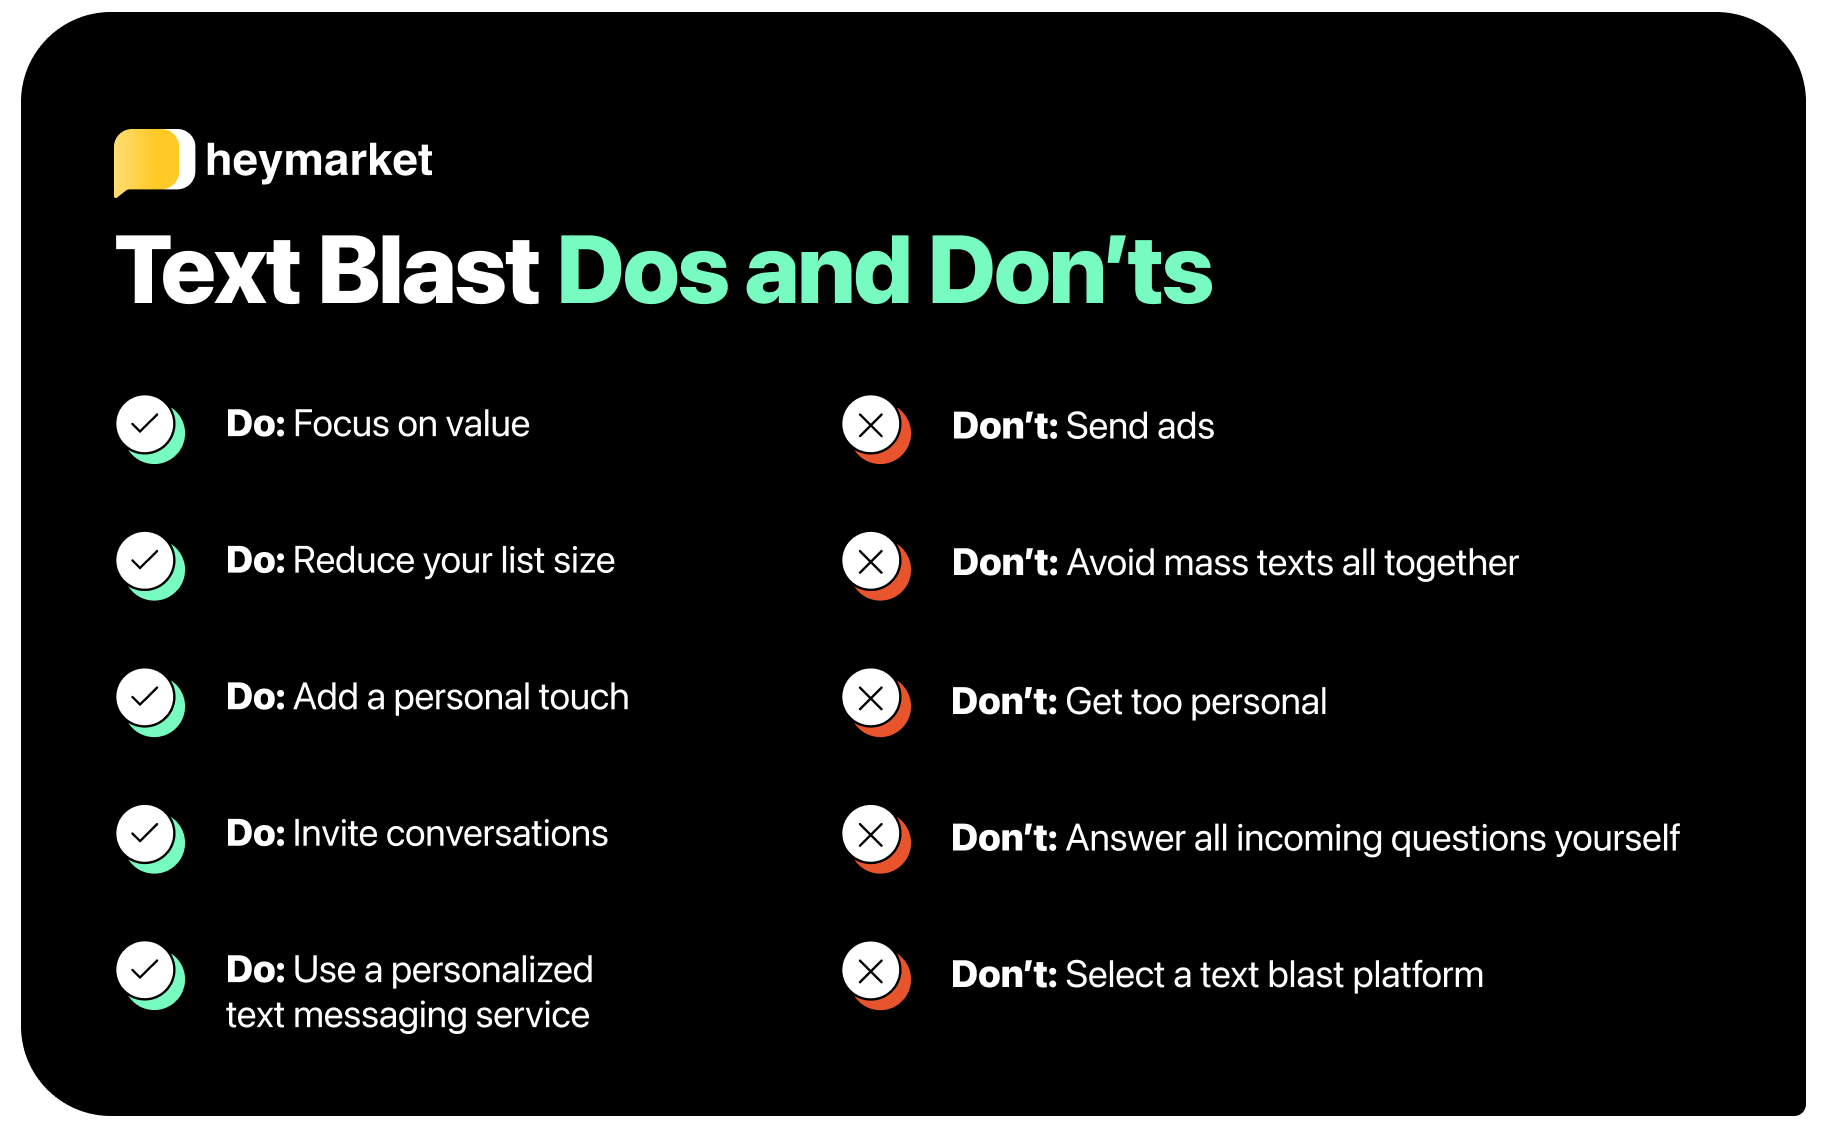 What to do and not do when sending an SMS blast